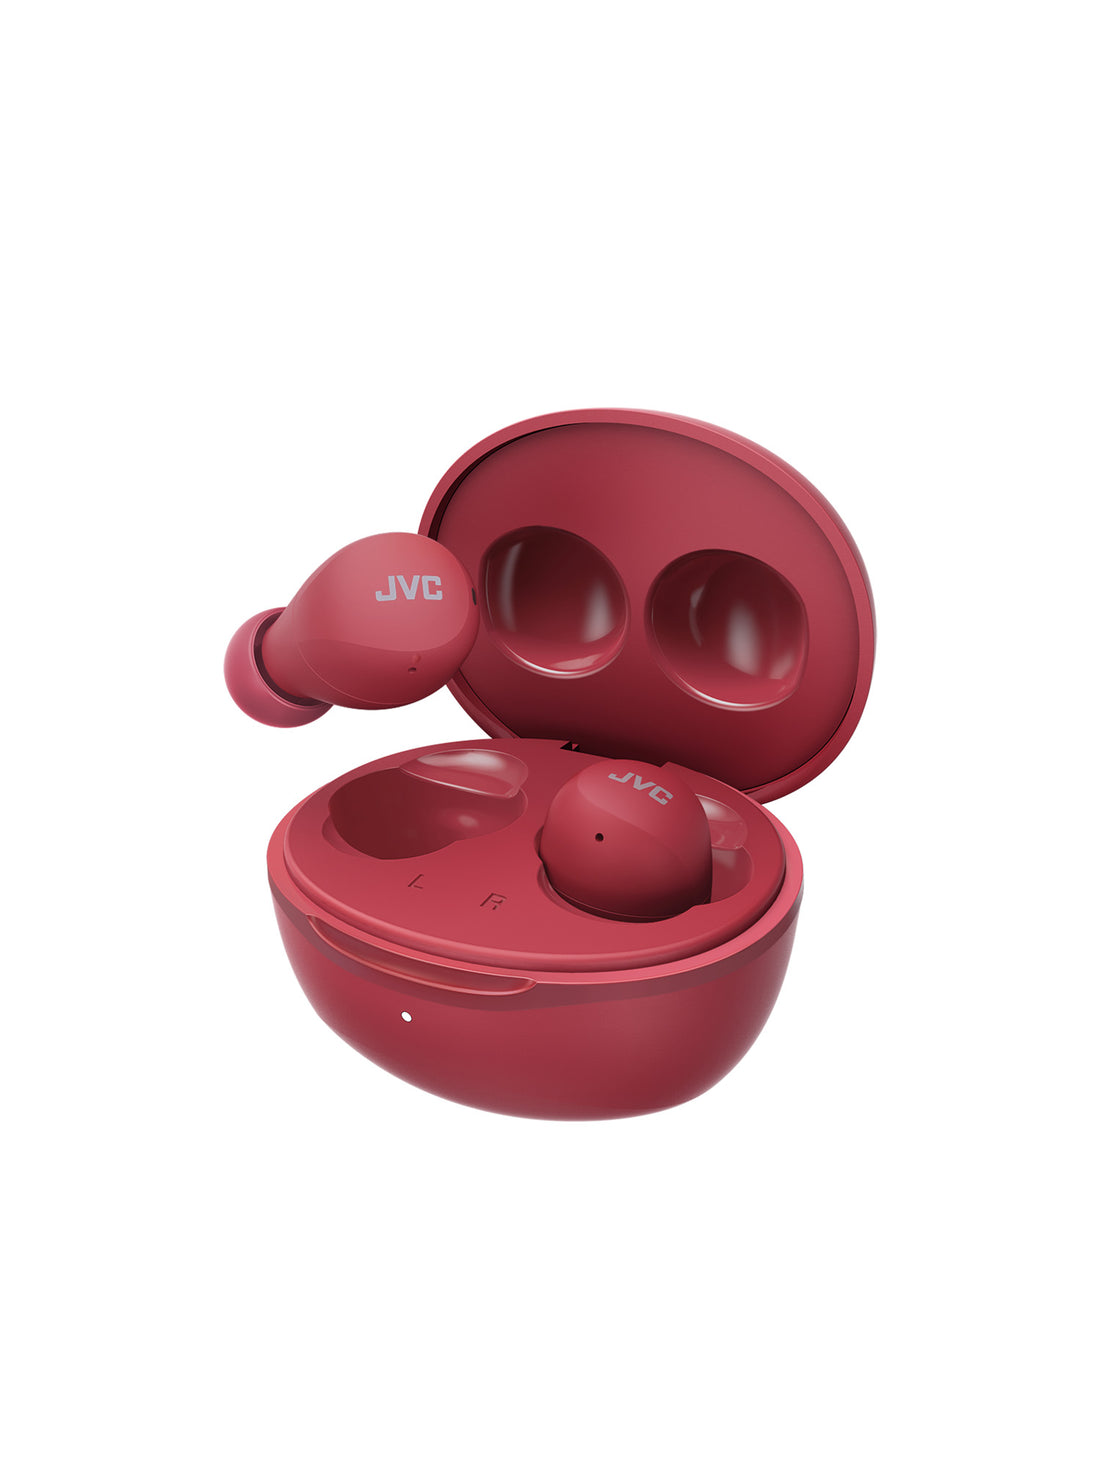 HA-A6T-R in Red Gumy mini wireless earbuds and charging case by JVC